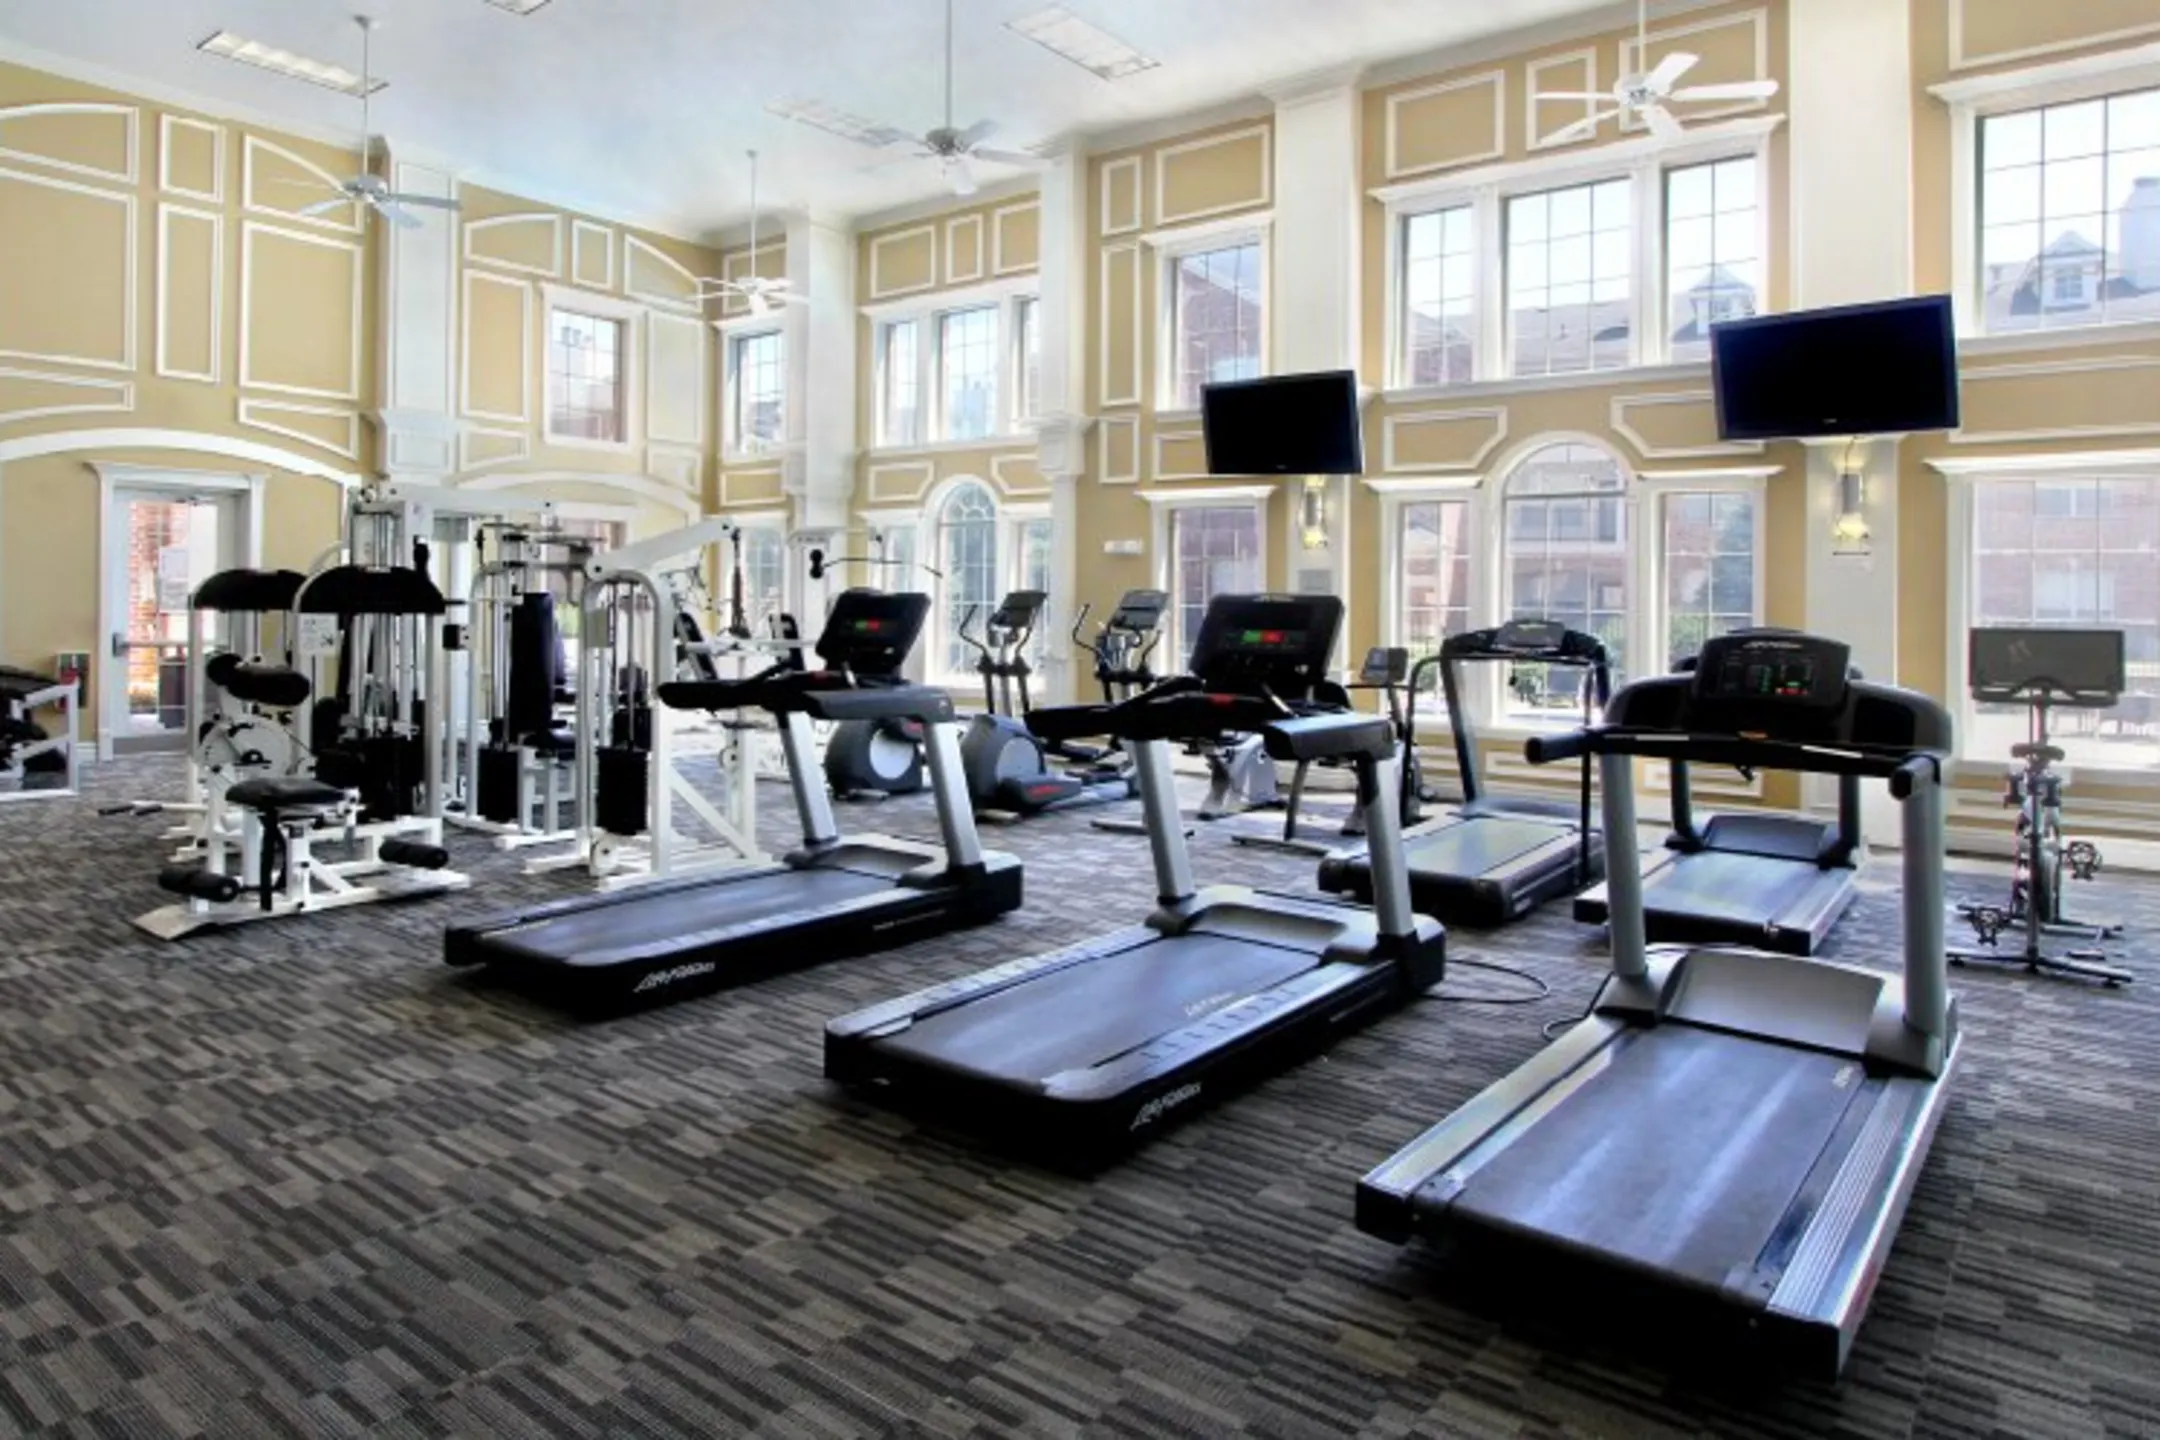 Fitness Weight Room - Turtlecreek Apartments - West Des Moines, IA